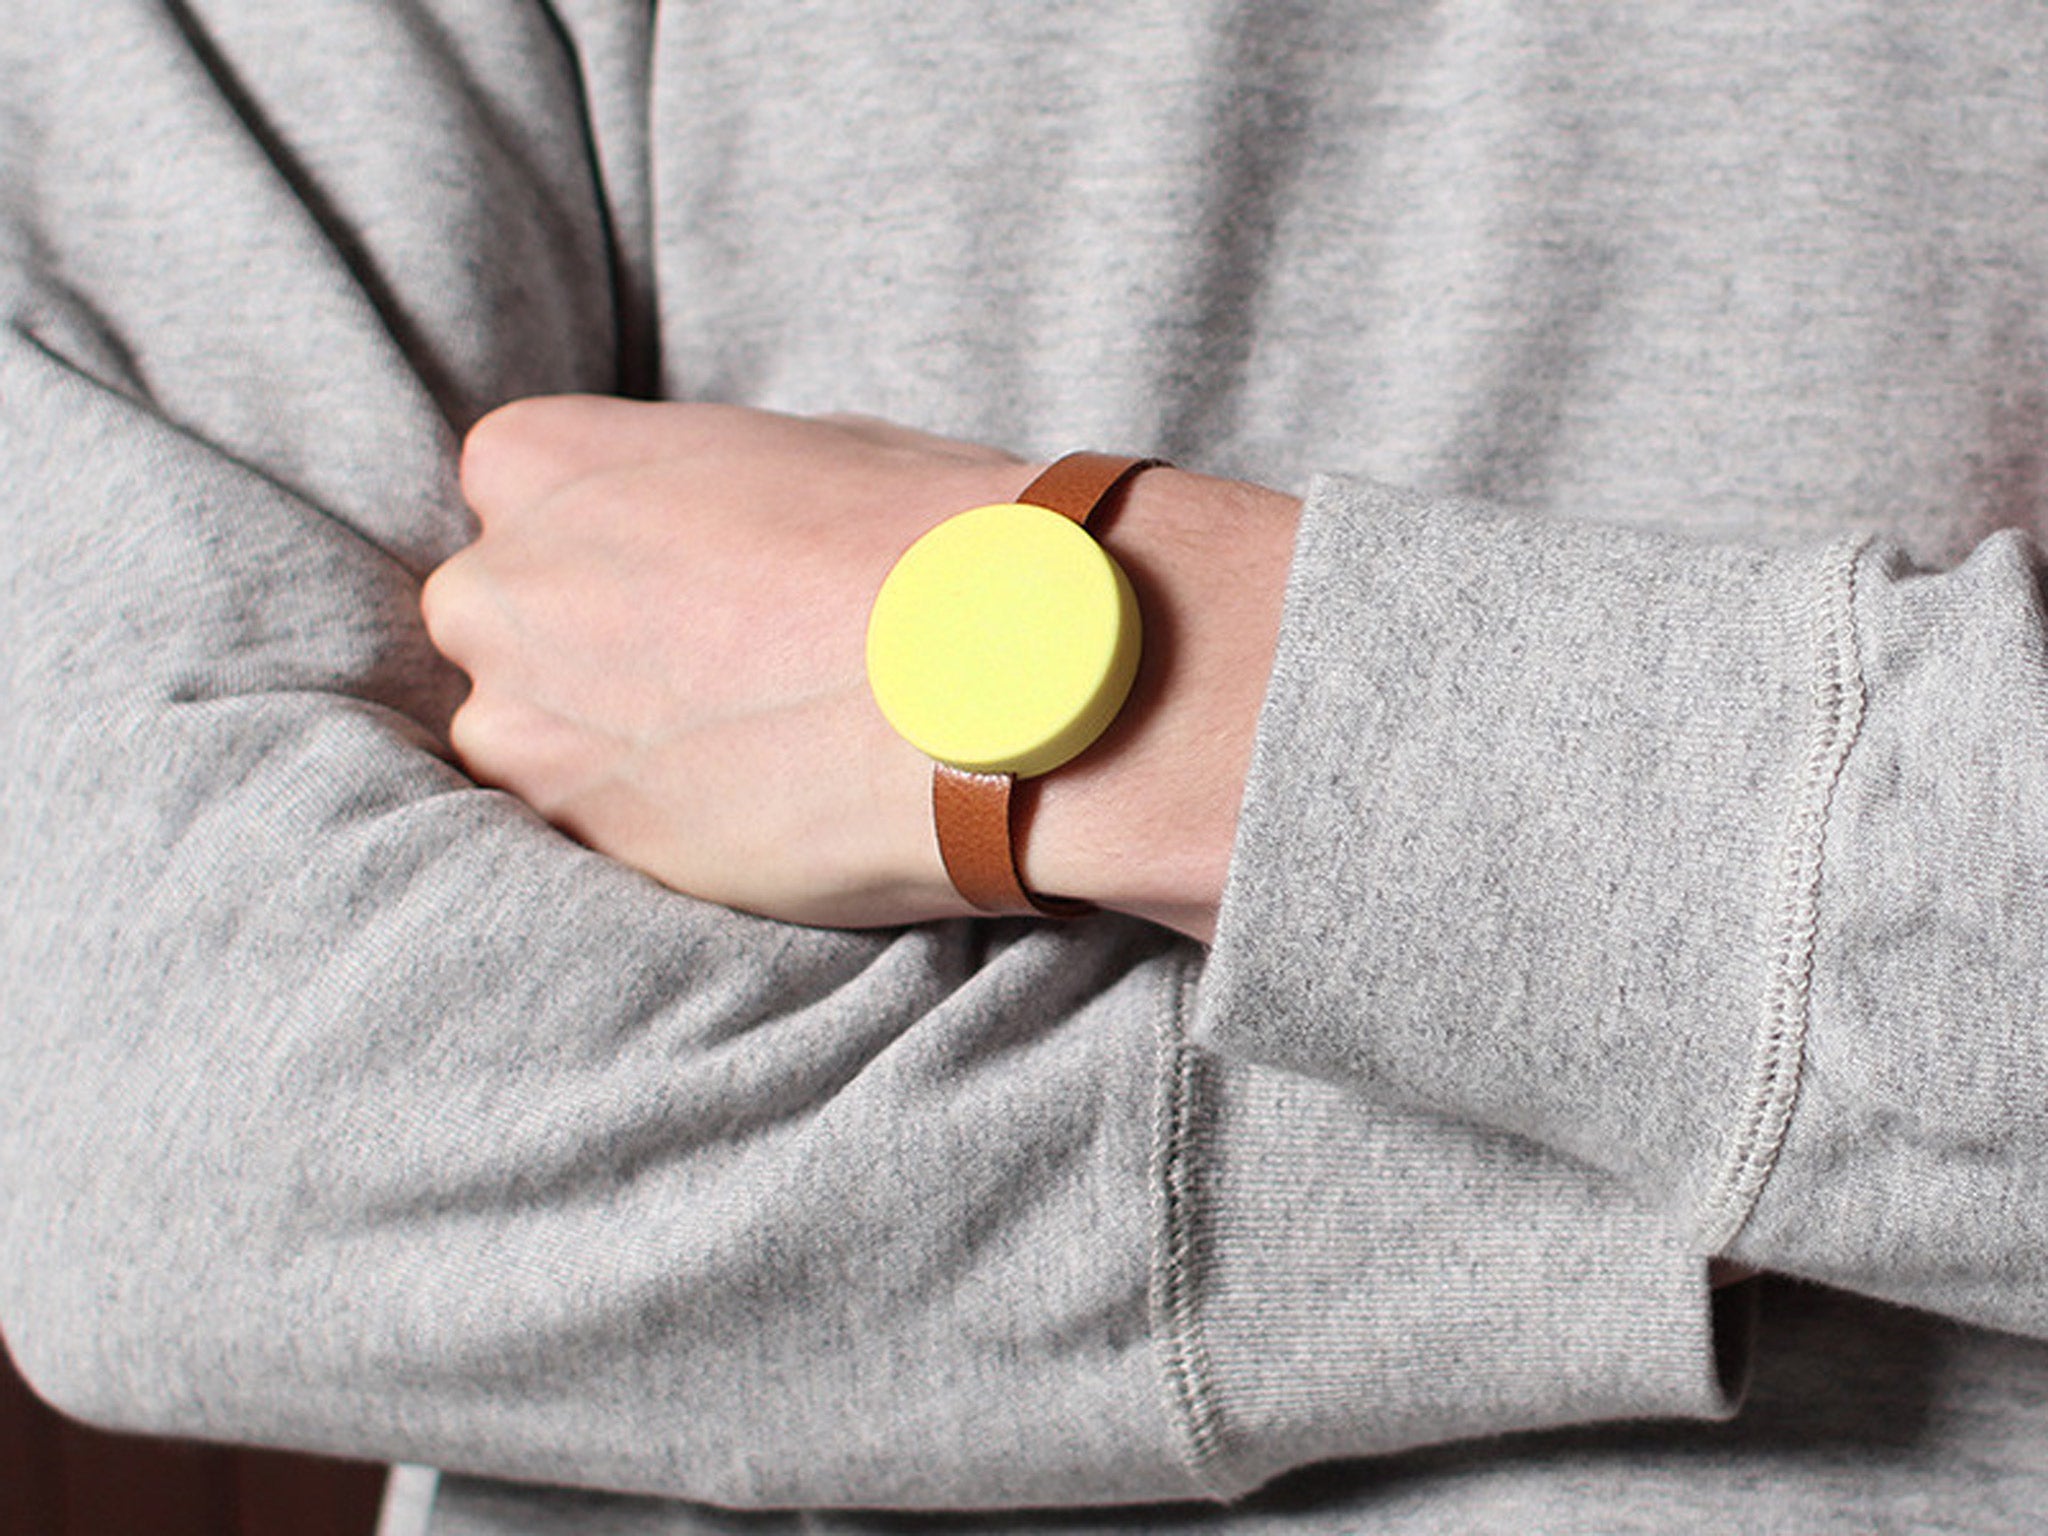 The 'Durr' watch's only function is to vibrate gently every five minutes